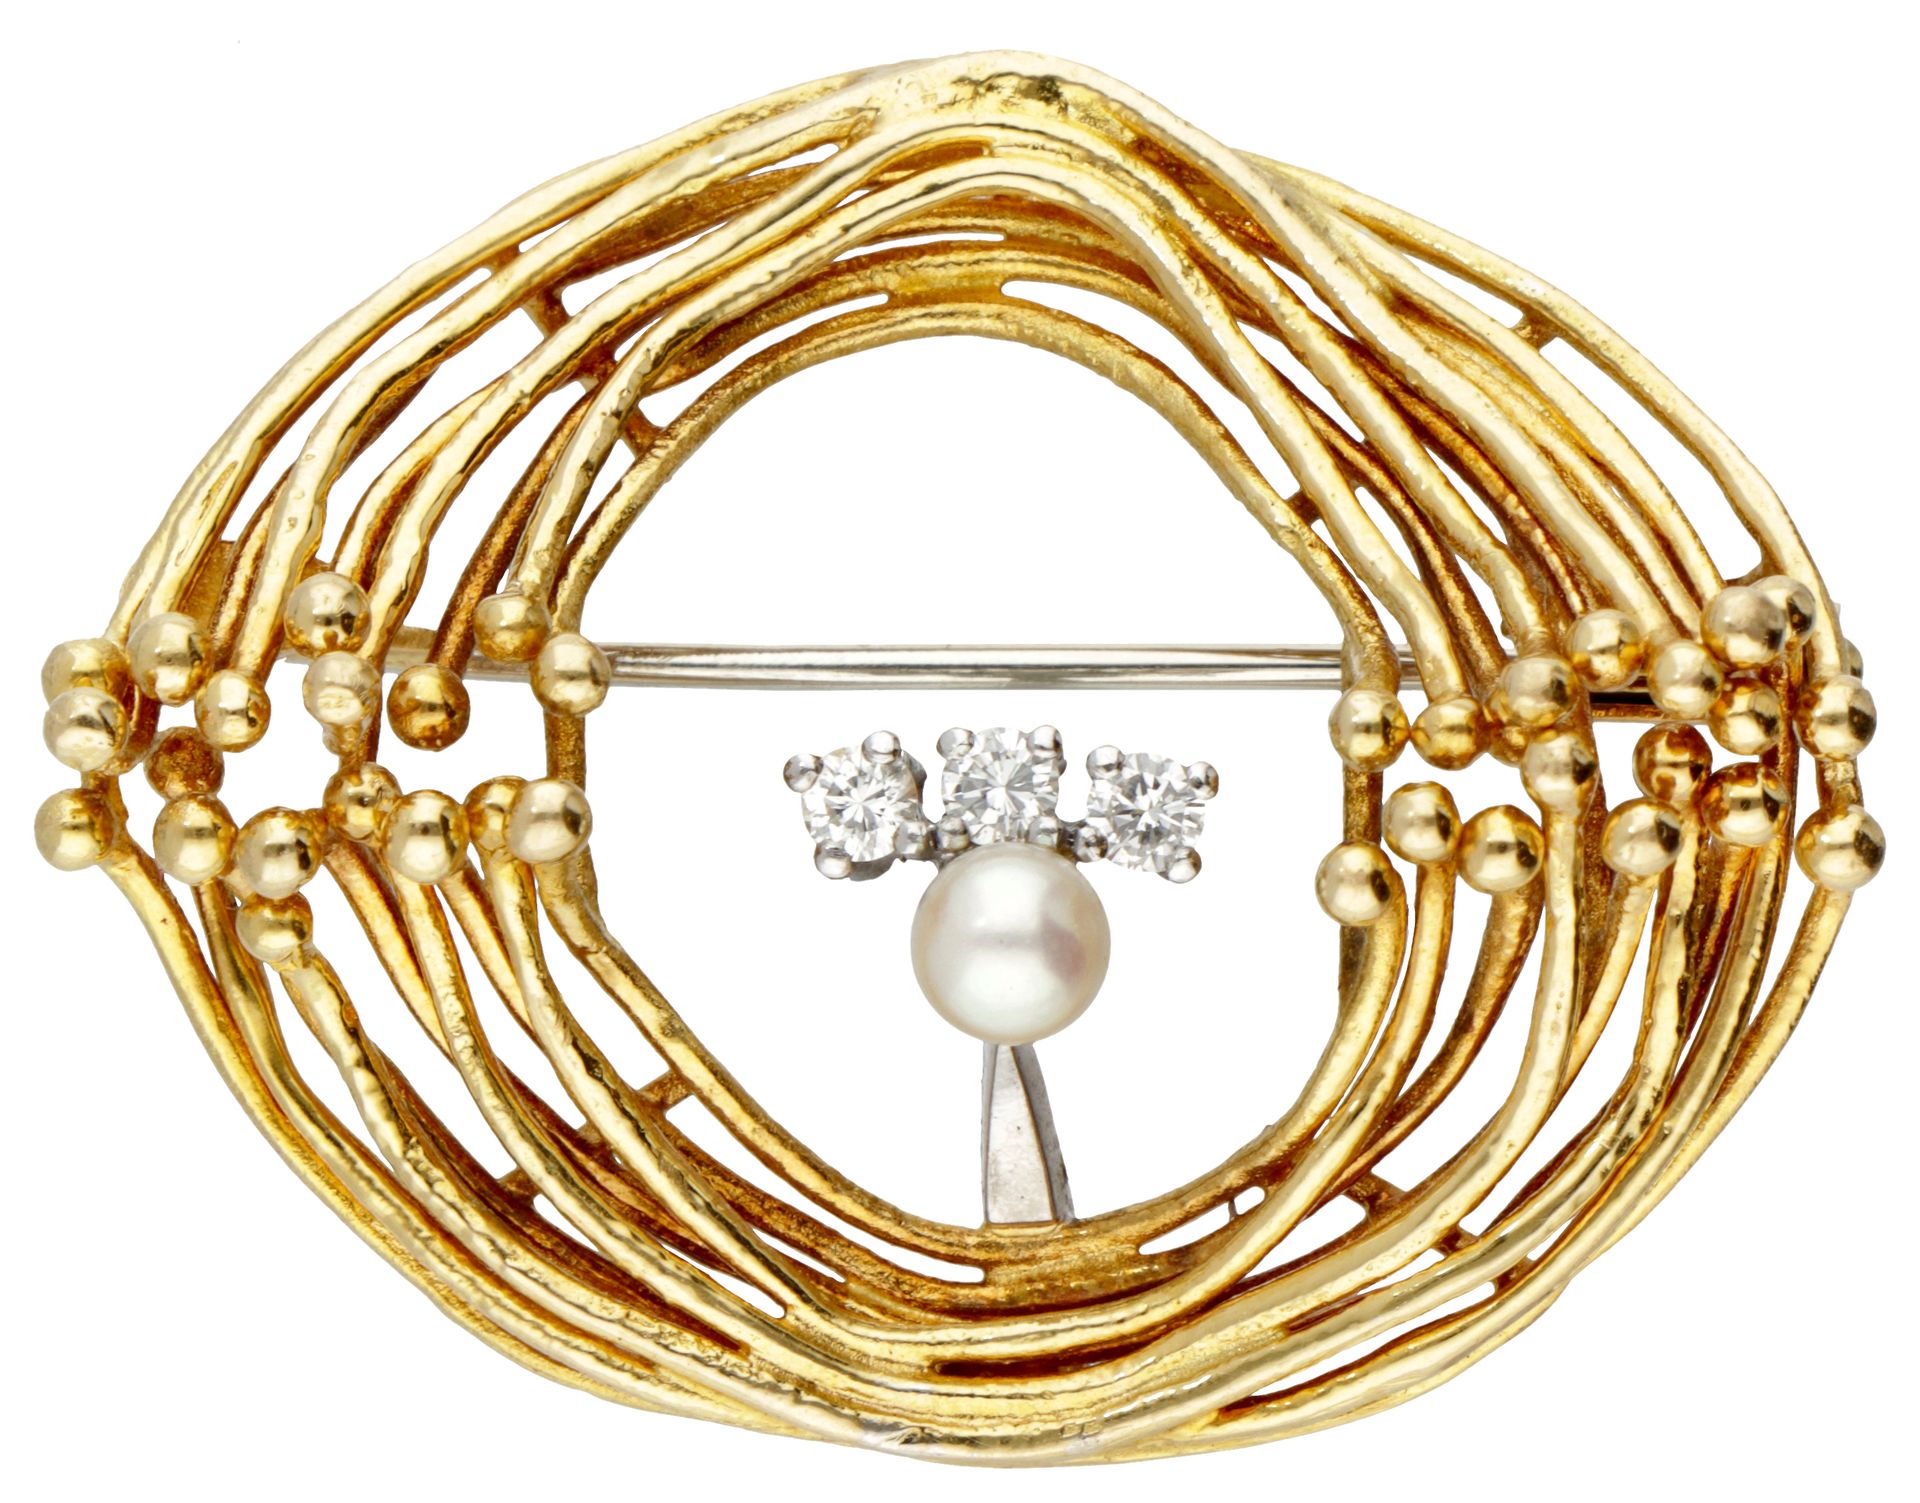 18K. Yellow gold brooch set with approx. 0.15 ct. Diamond and a pearl. Hallmarks&hellip;